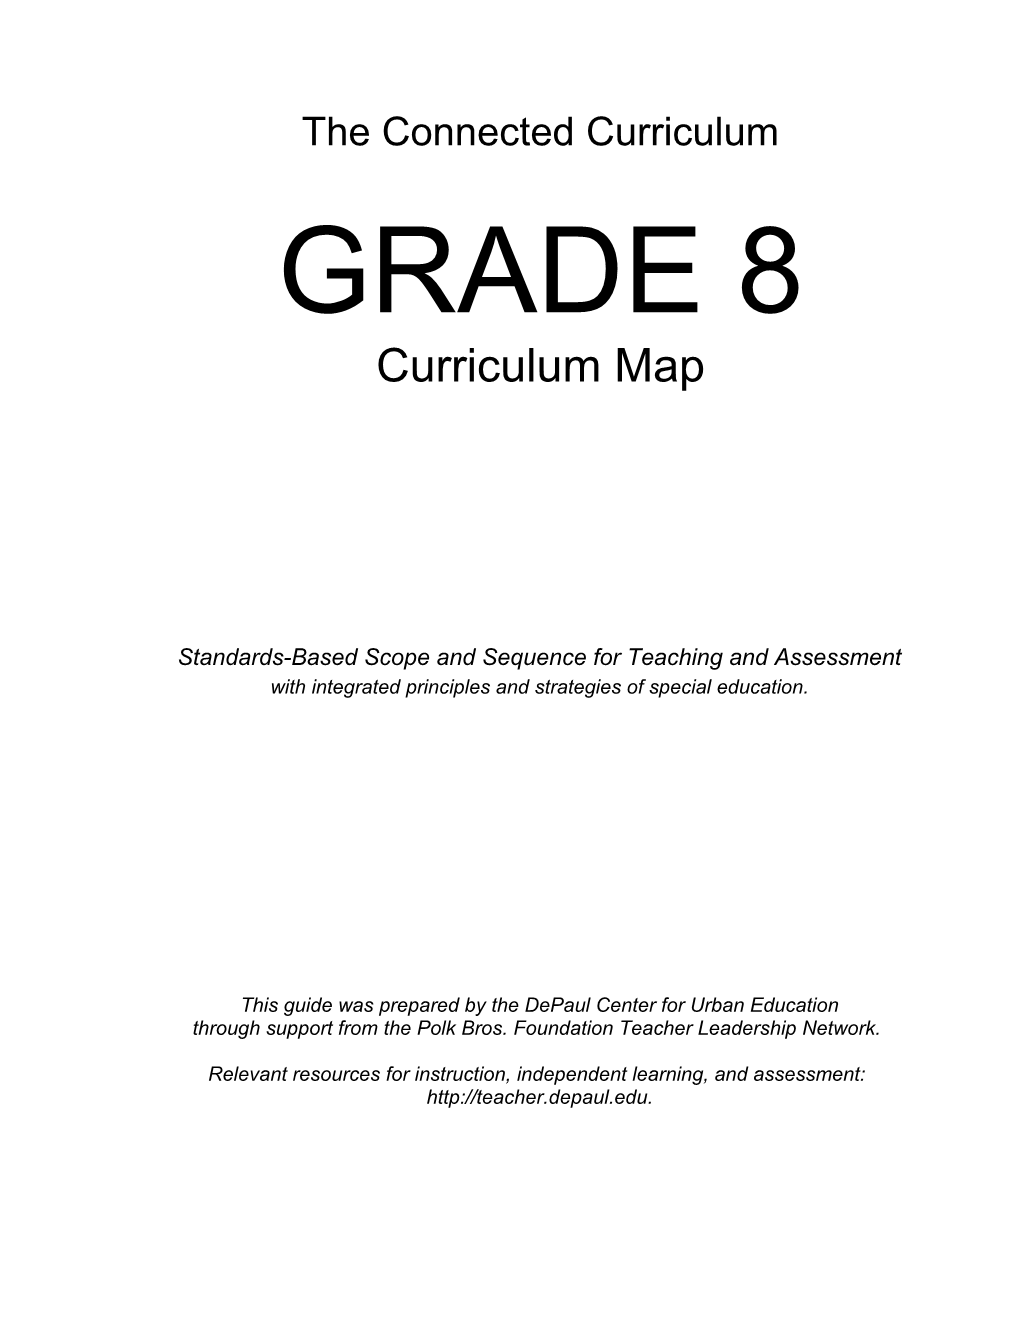 Standards-Based Scope and Sequence for Teaching and Assessment